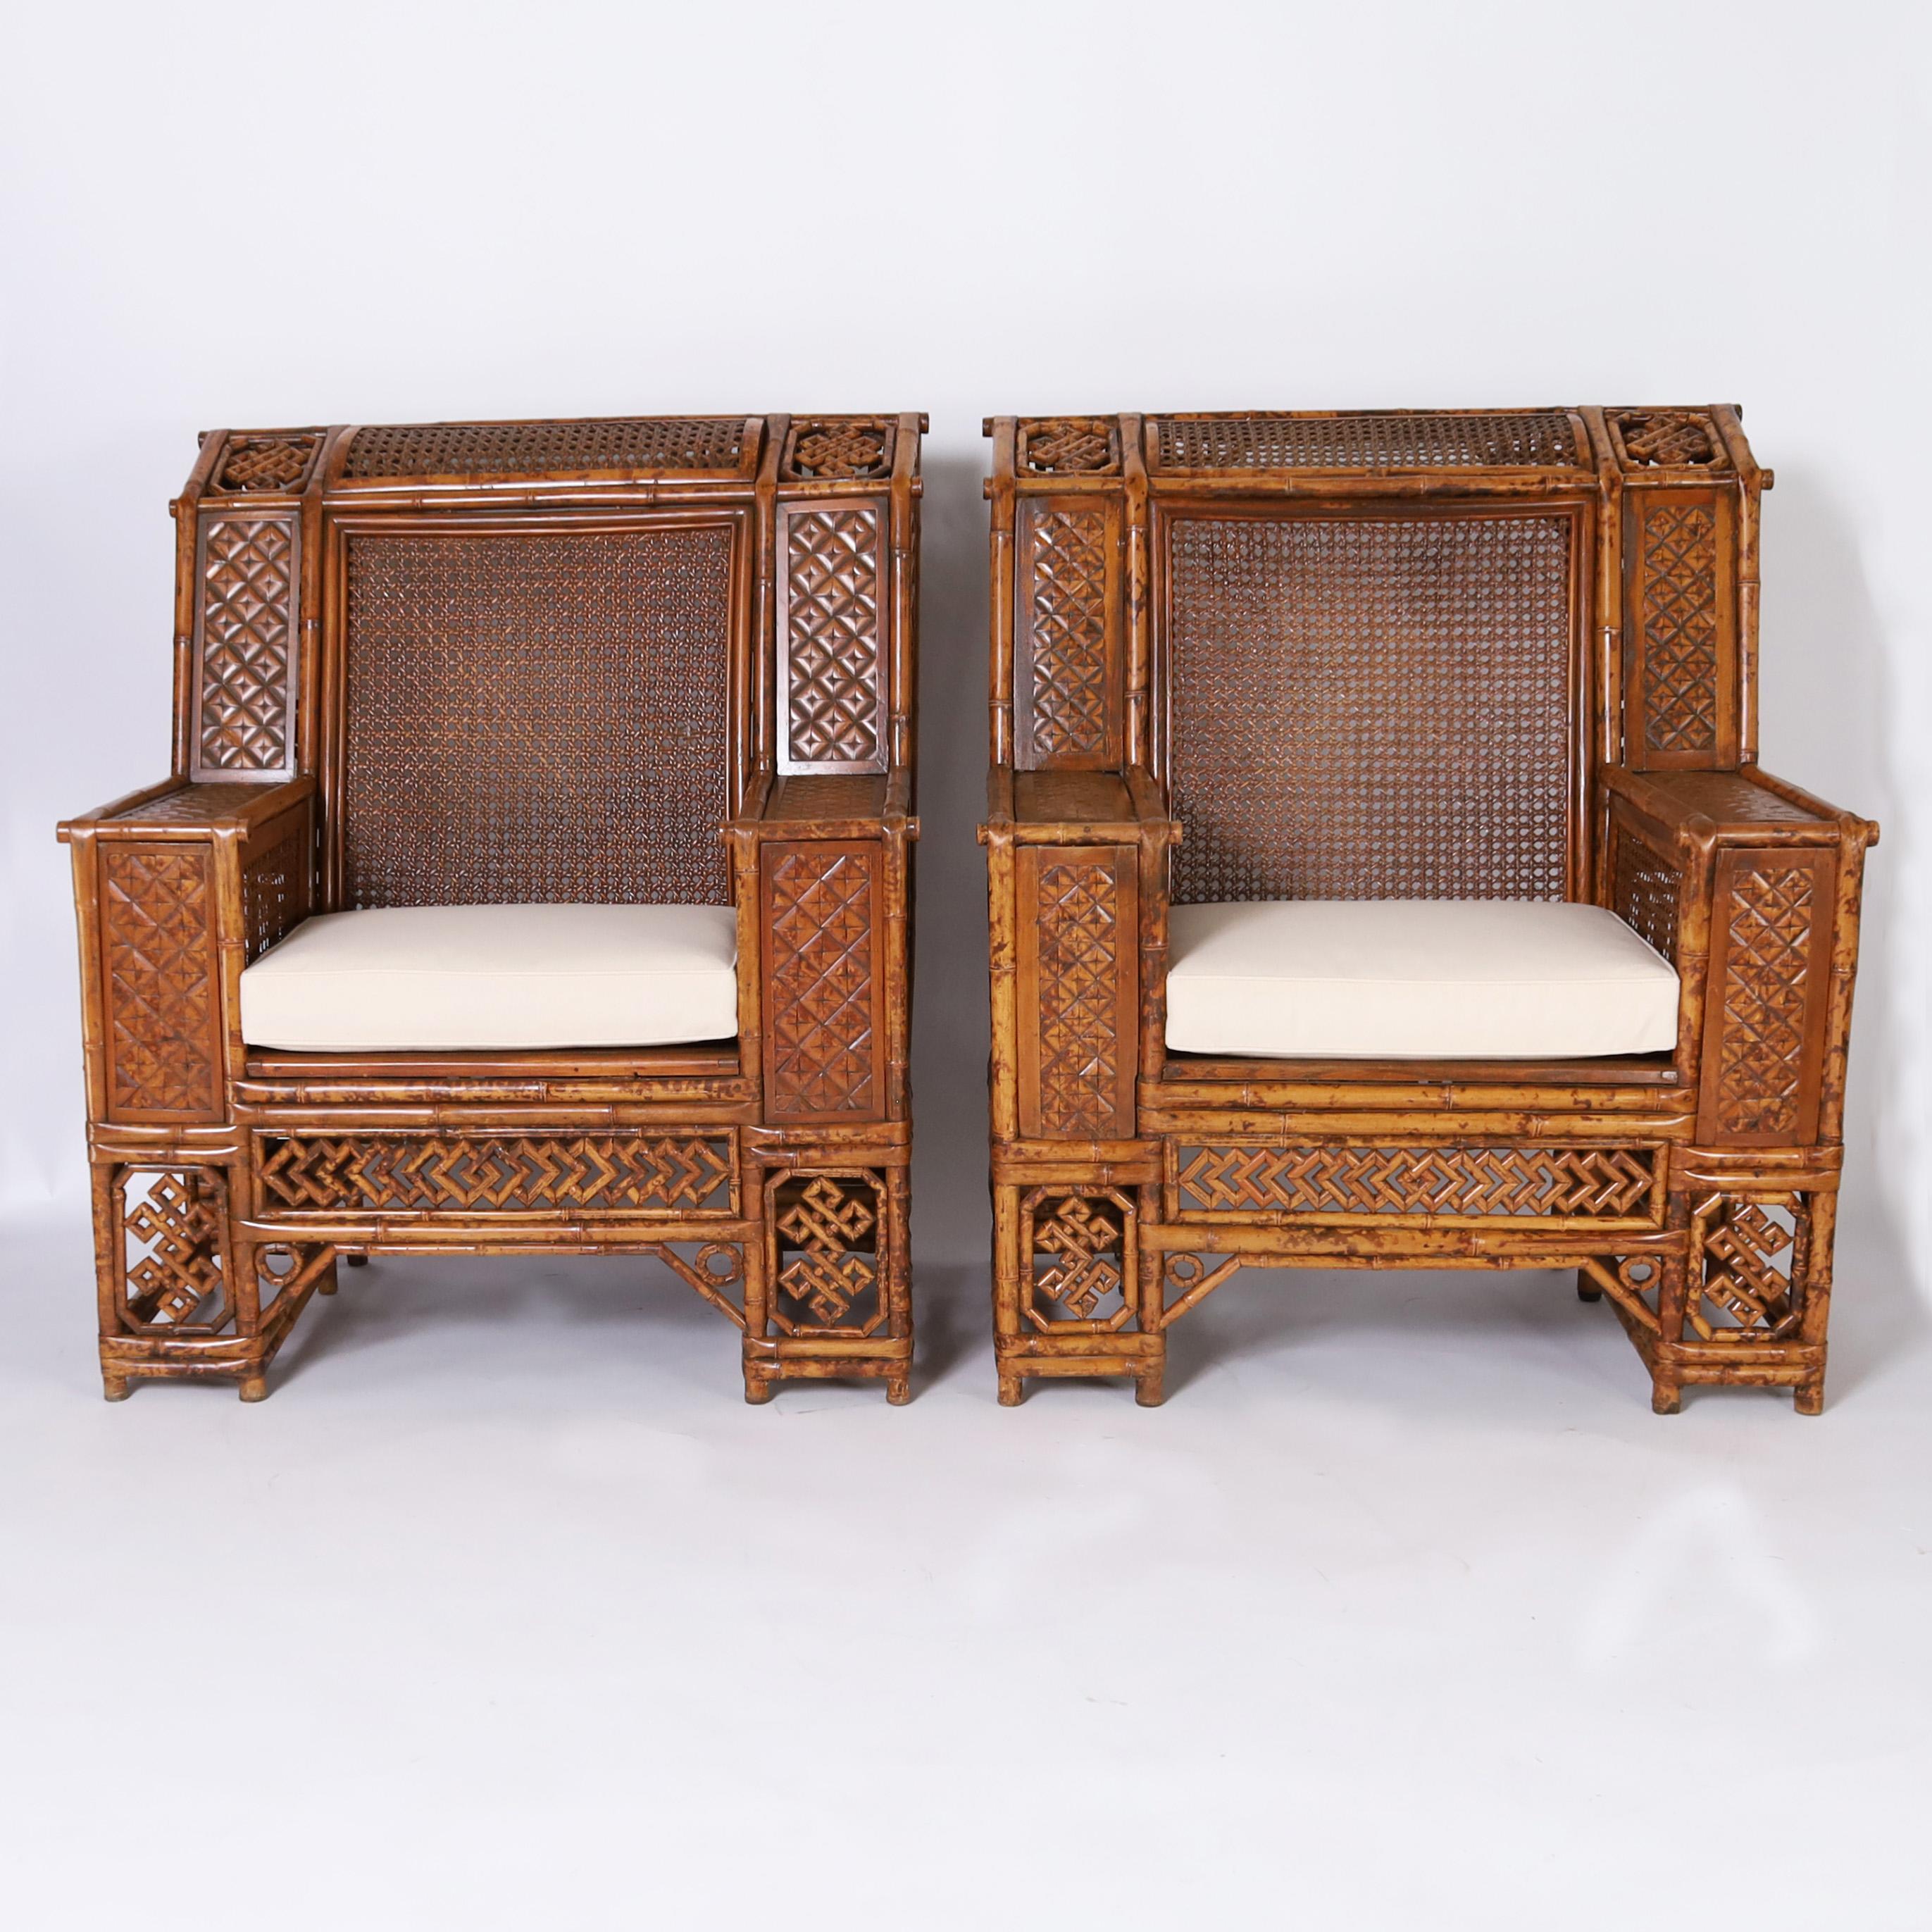 Rare and remarkable ultimate pair of Chinese bamboo club chairs handcrafted in a pegged construction featuring elaborate chippendale motifs on the backs, sides, and front, polished coconut arms, caned backs and seats and twelve legs each. Best of